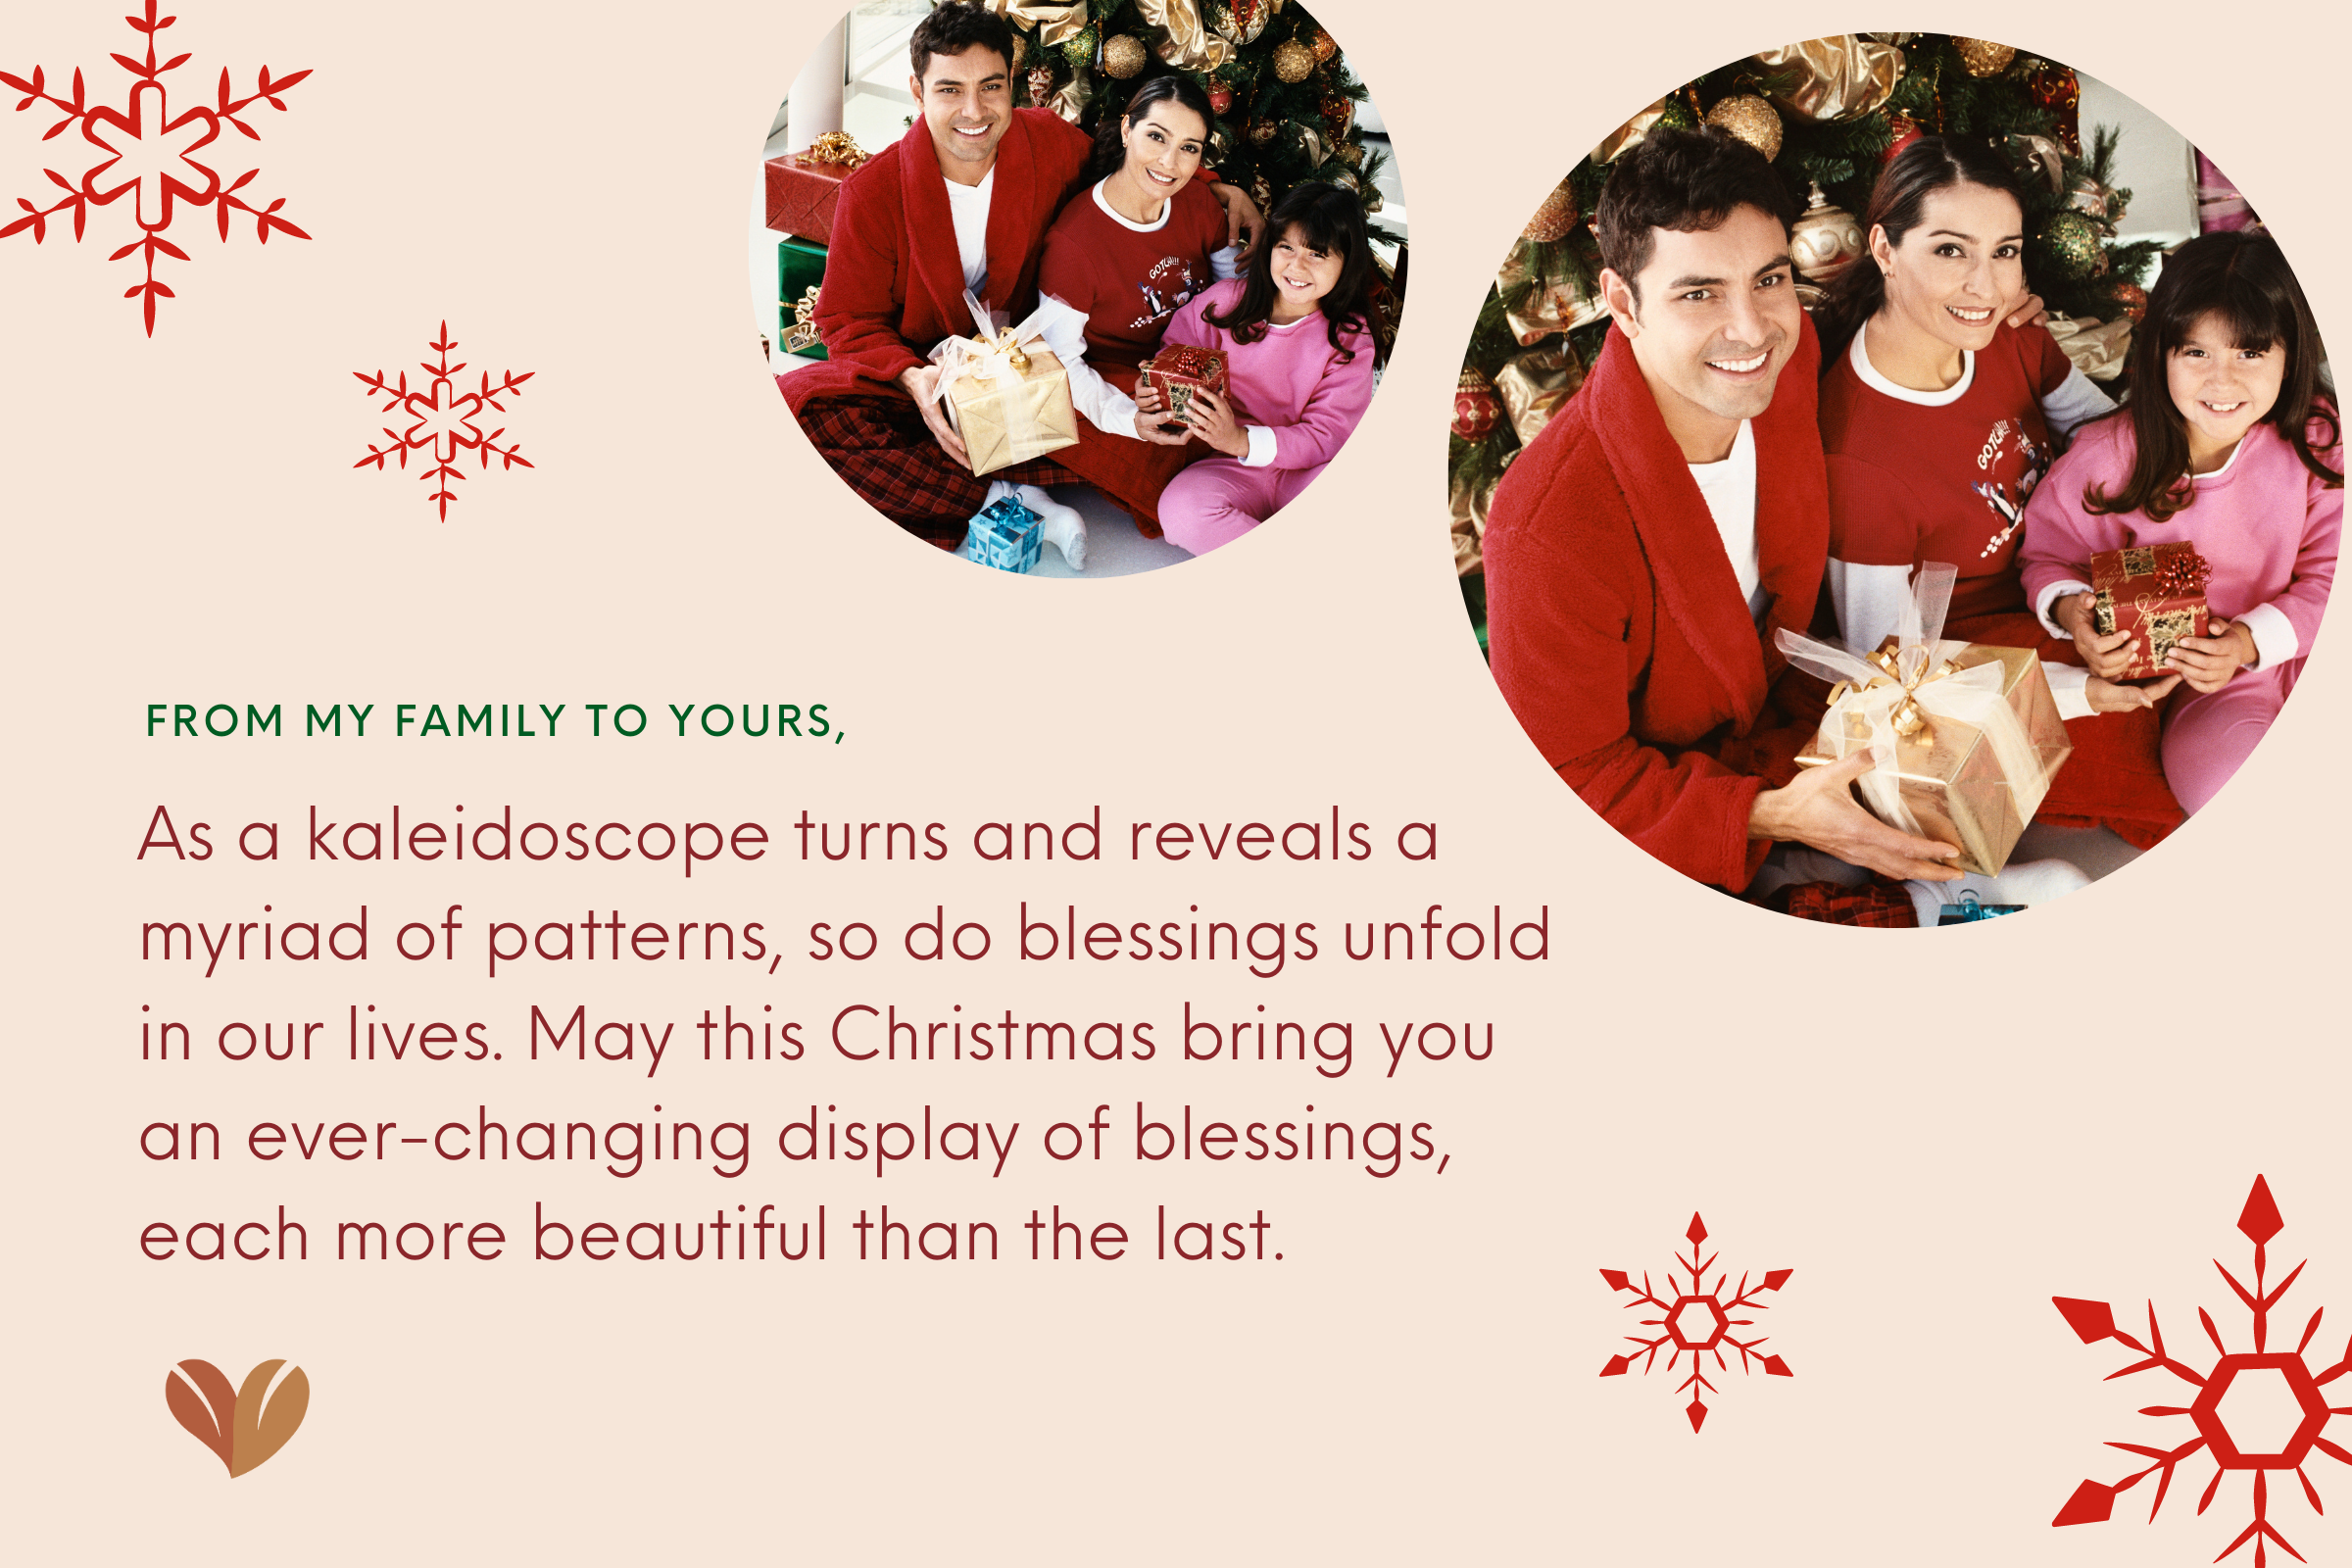 Merry Christmas wishes from our family to yours are a surprise to express our hearts